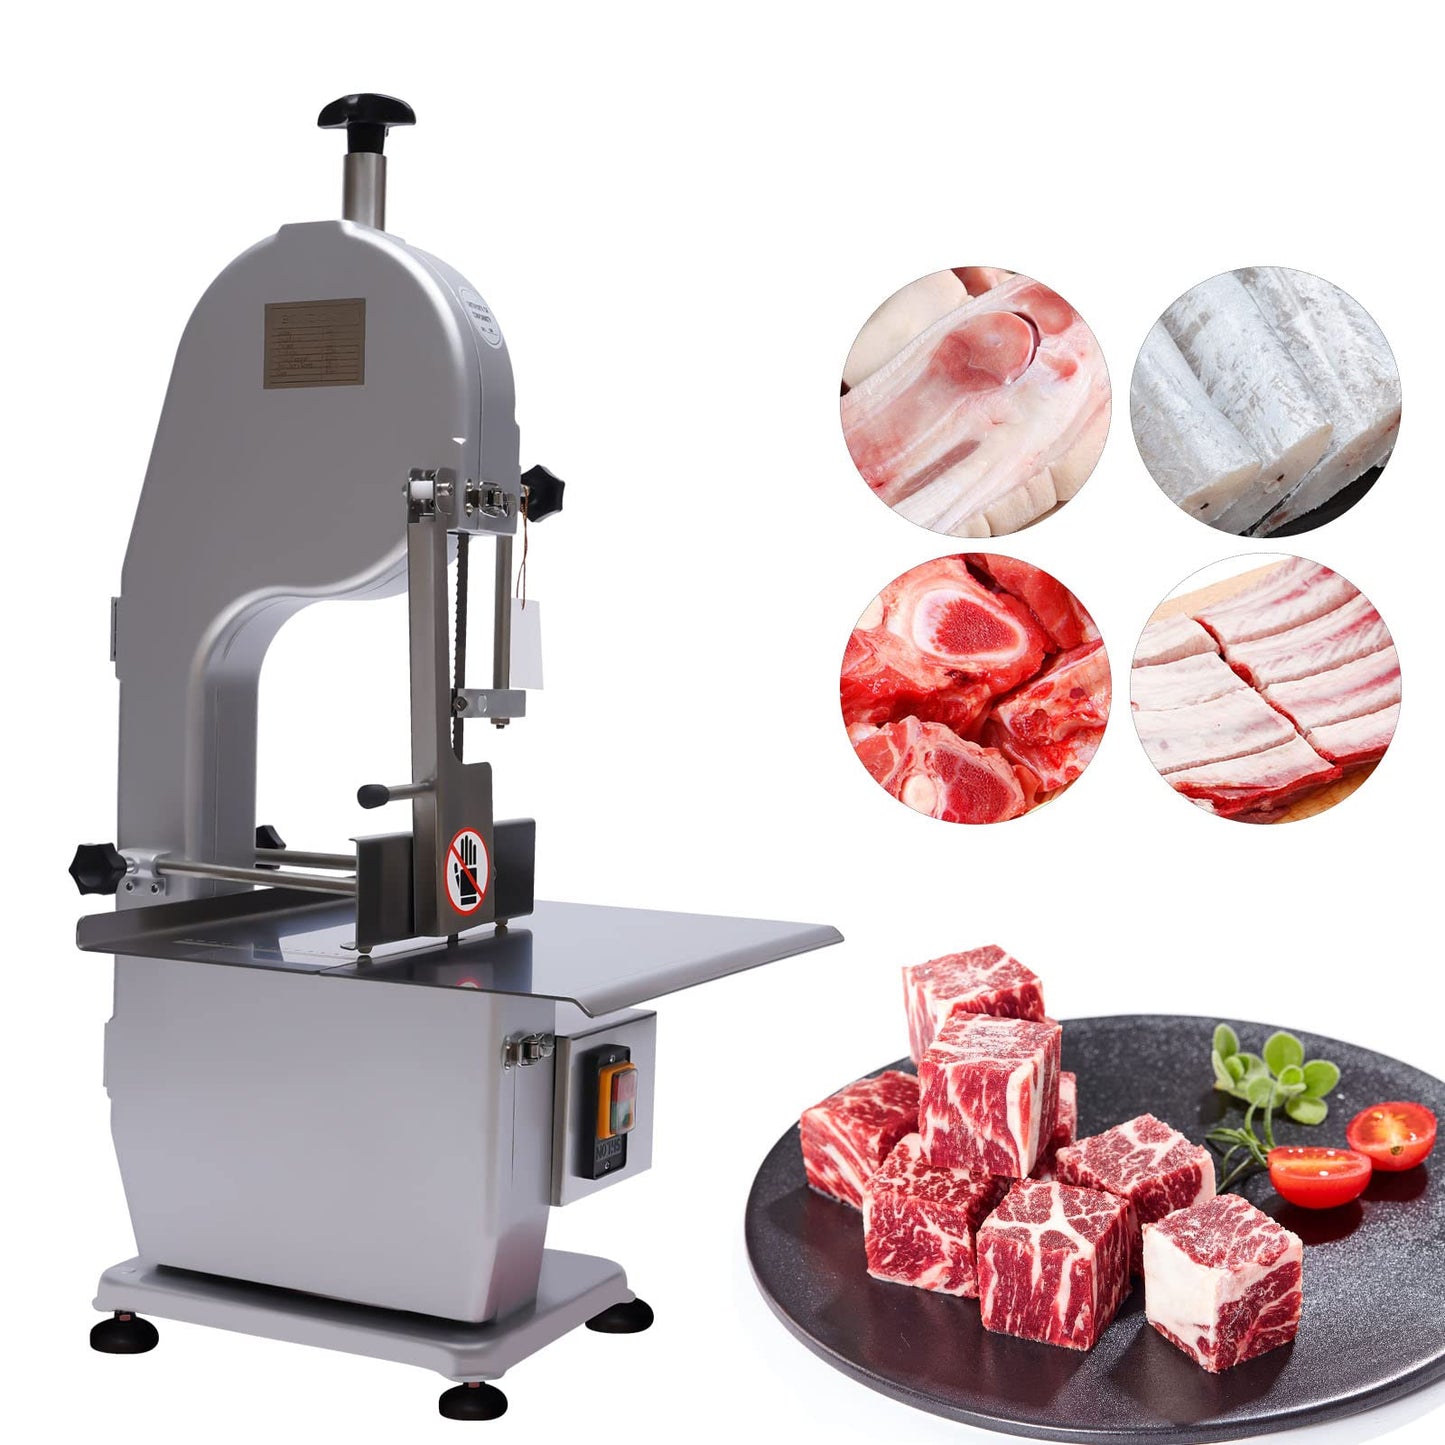 Food Slicer Bone Saw Machine, 1500W Frozen Meat Cutter, Butcher Cutting Machine with Bandsaw, Max Cutting Height 150mm,Work Table 14.8 x 19.7inches,